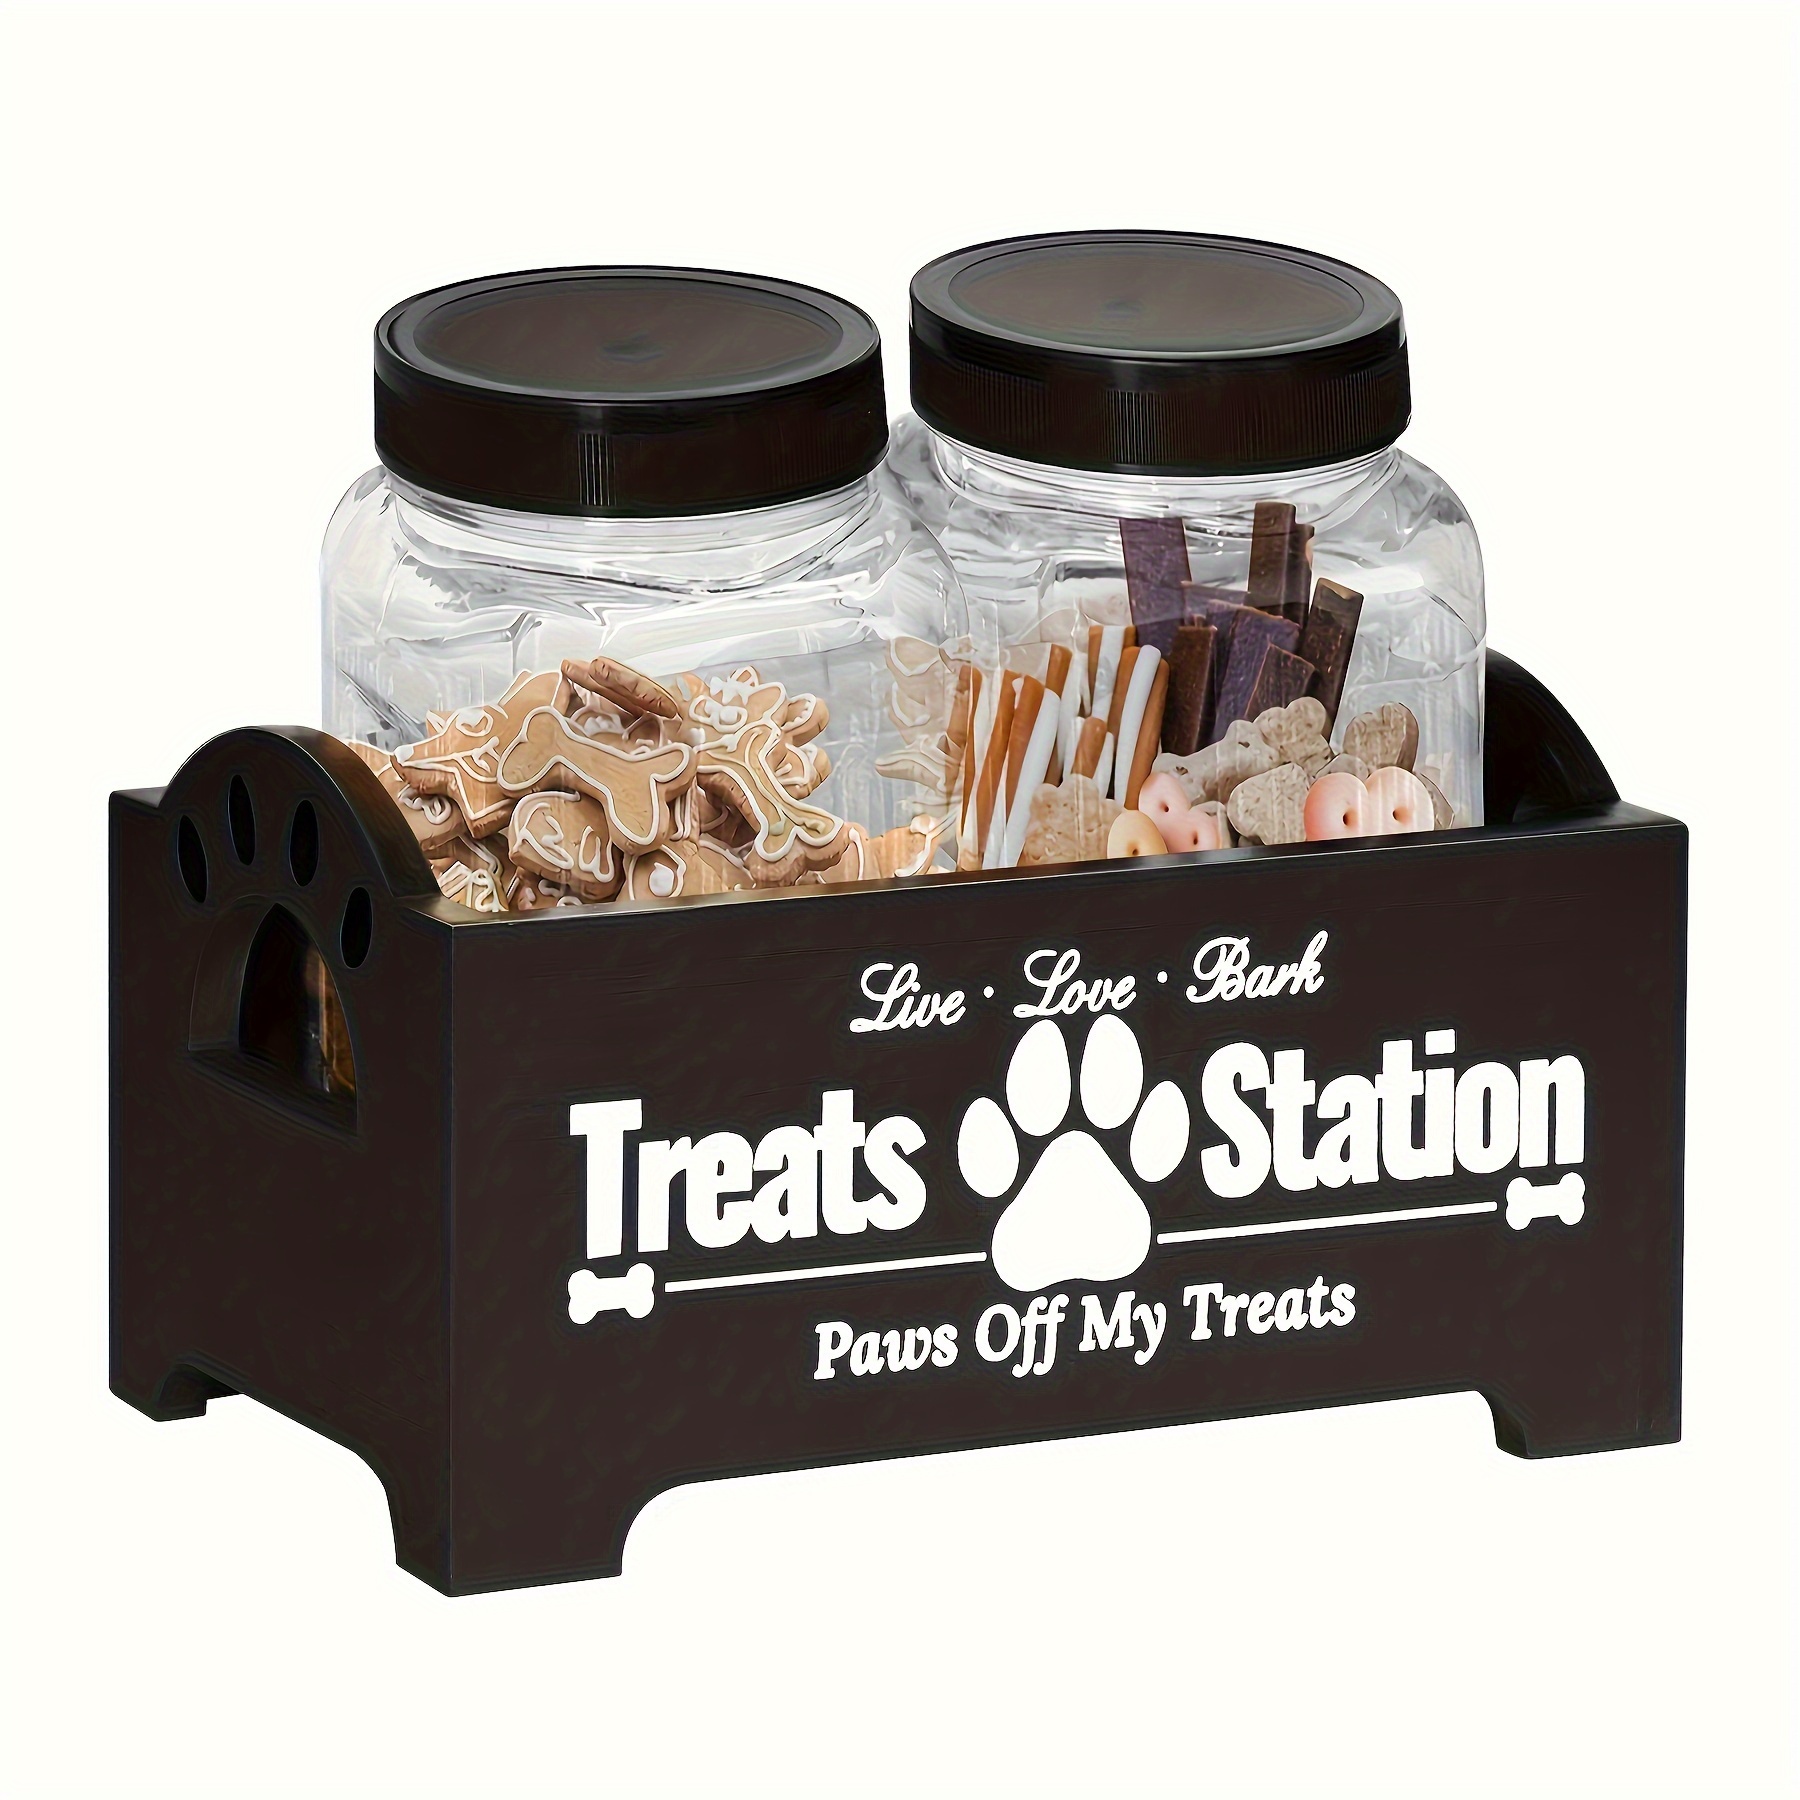 

3pcs Dog Treat Container, Farmhouse Pet Food Container, Pet Food Storage Organizer, Wooden Dog Treat Holder With 2 Plastic Dog Treat Jars